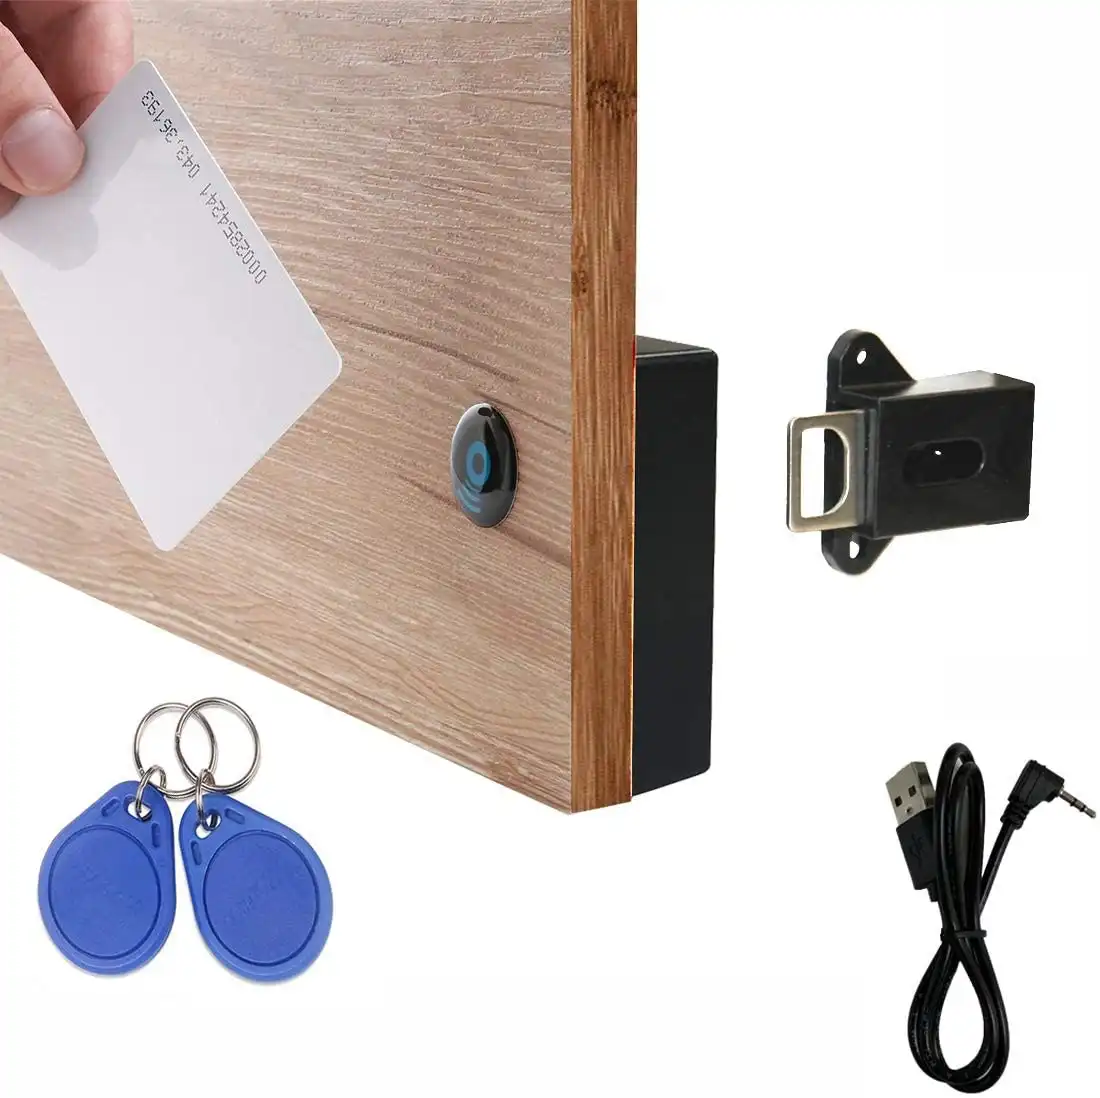 WOOCH RFID Locks for Cabinets Hidden DIY Lock - Electronic Cabinet Lock with USB Cable, RFID Card/Tag/Wristband Entry